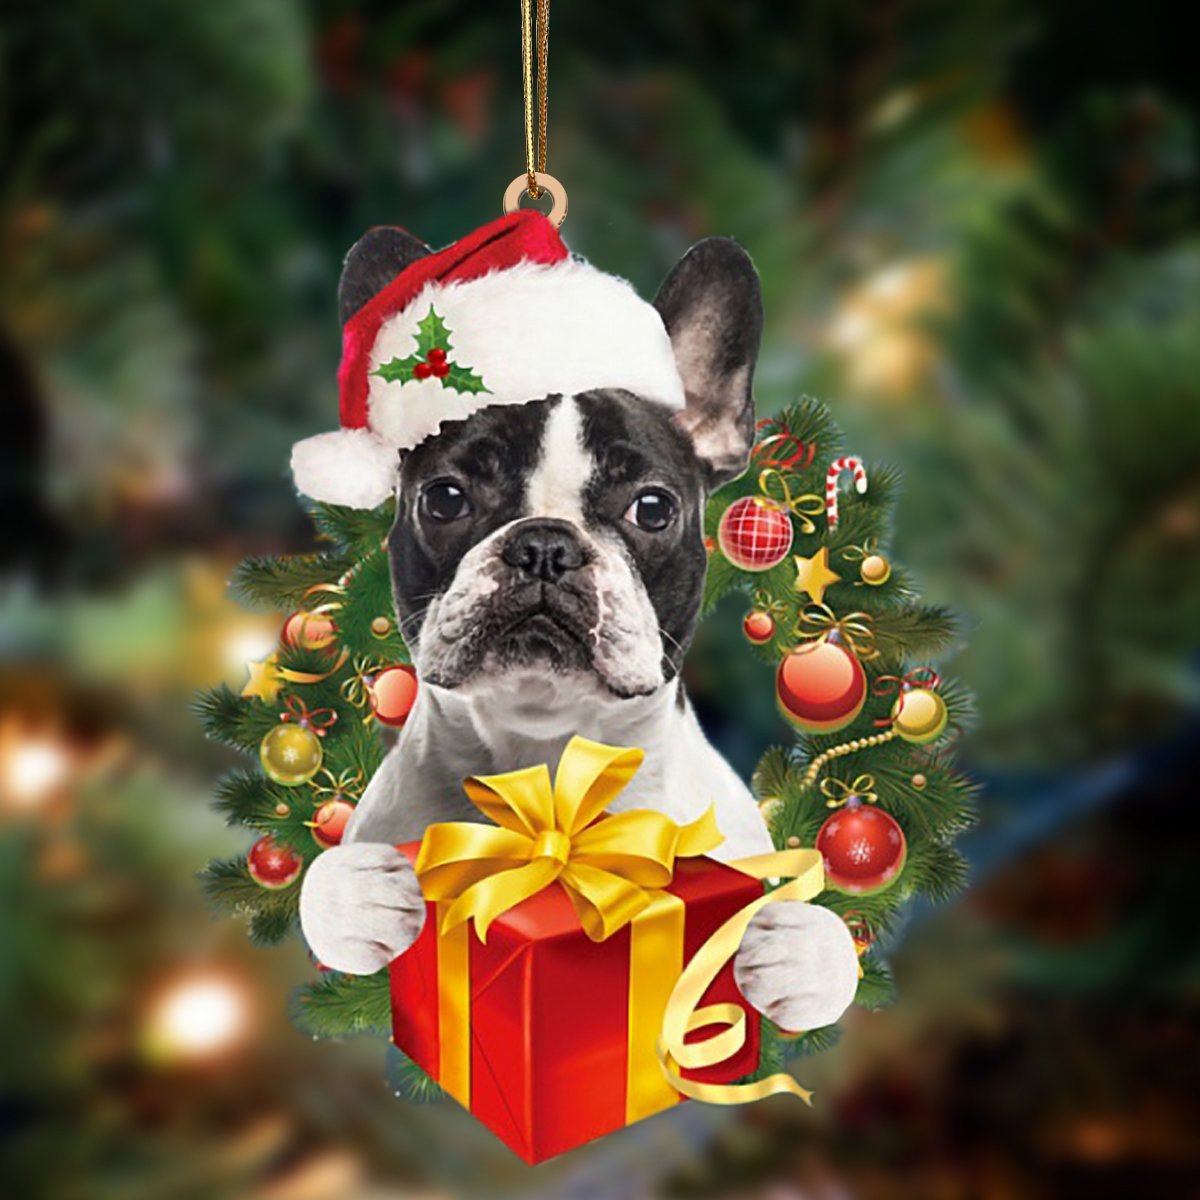 French Bulldog-Dogs give gifts Hanging Ornament